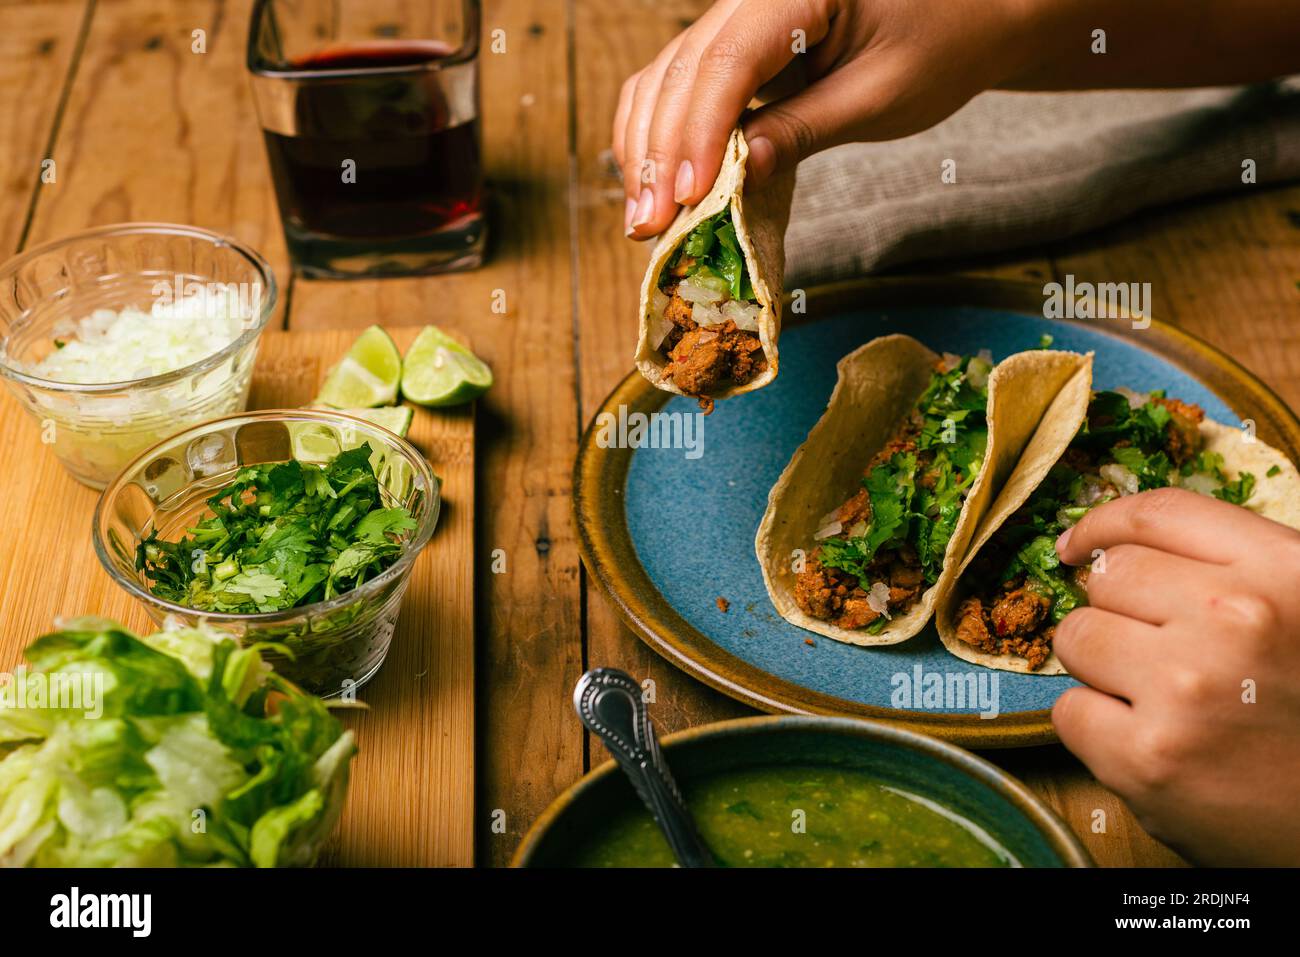 Woman's hand holding a taco of marinated meat. Plate with tacos, sauce and vegetables on wooden table. Top view. Stock Photo